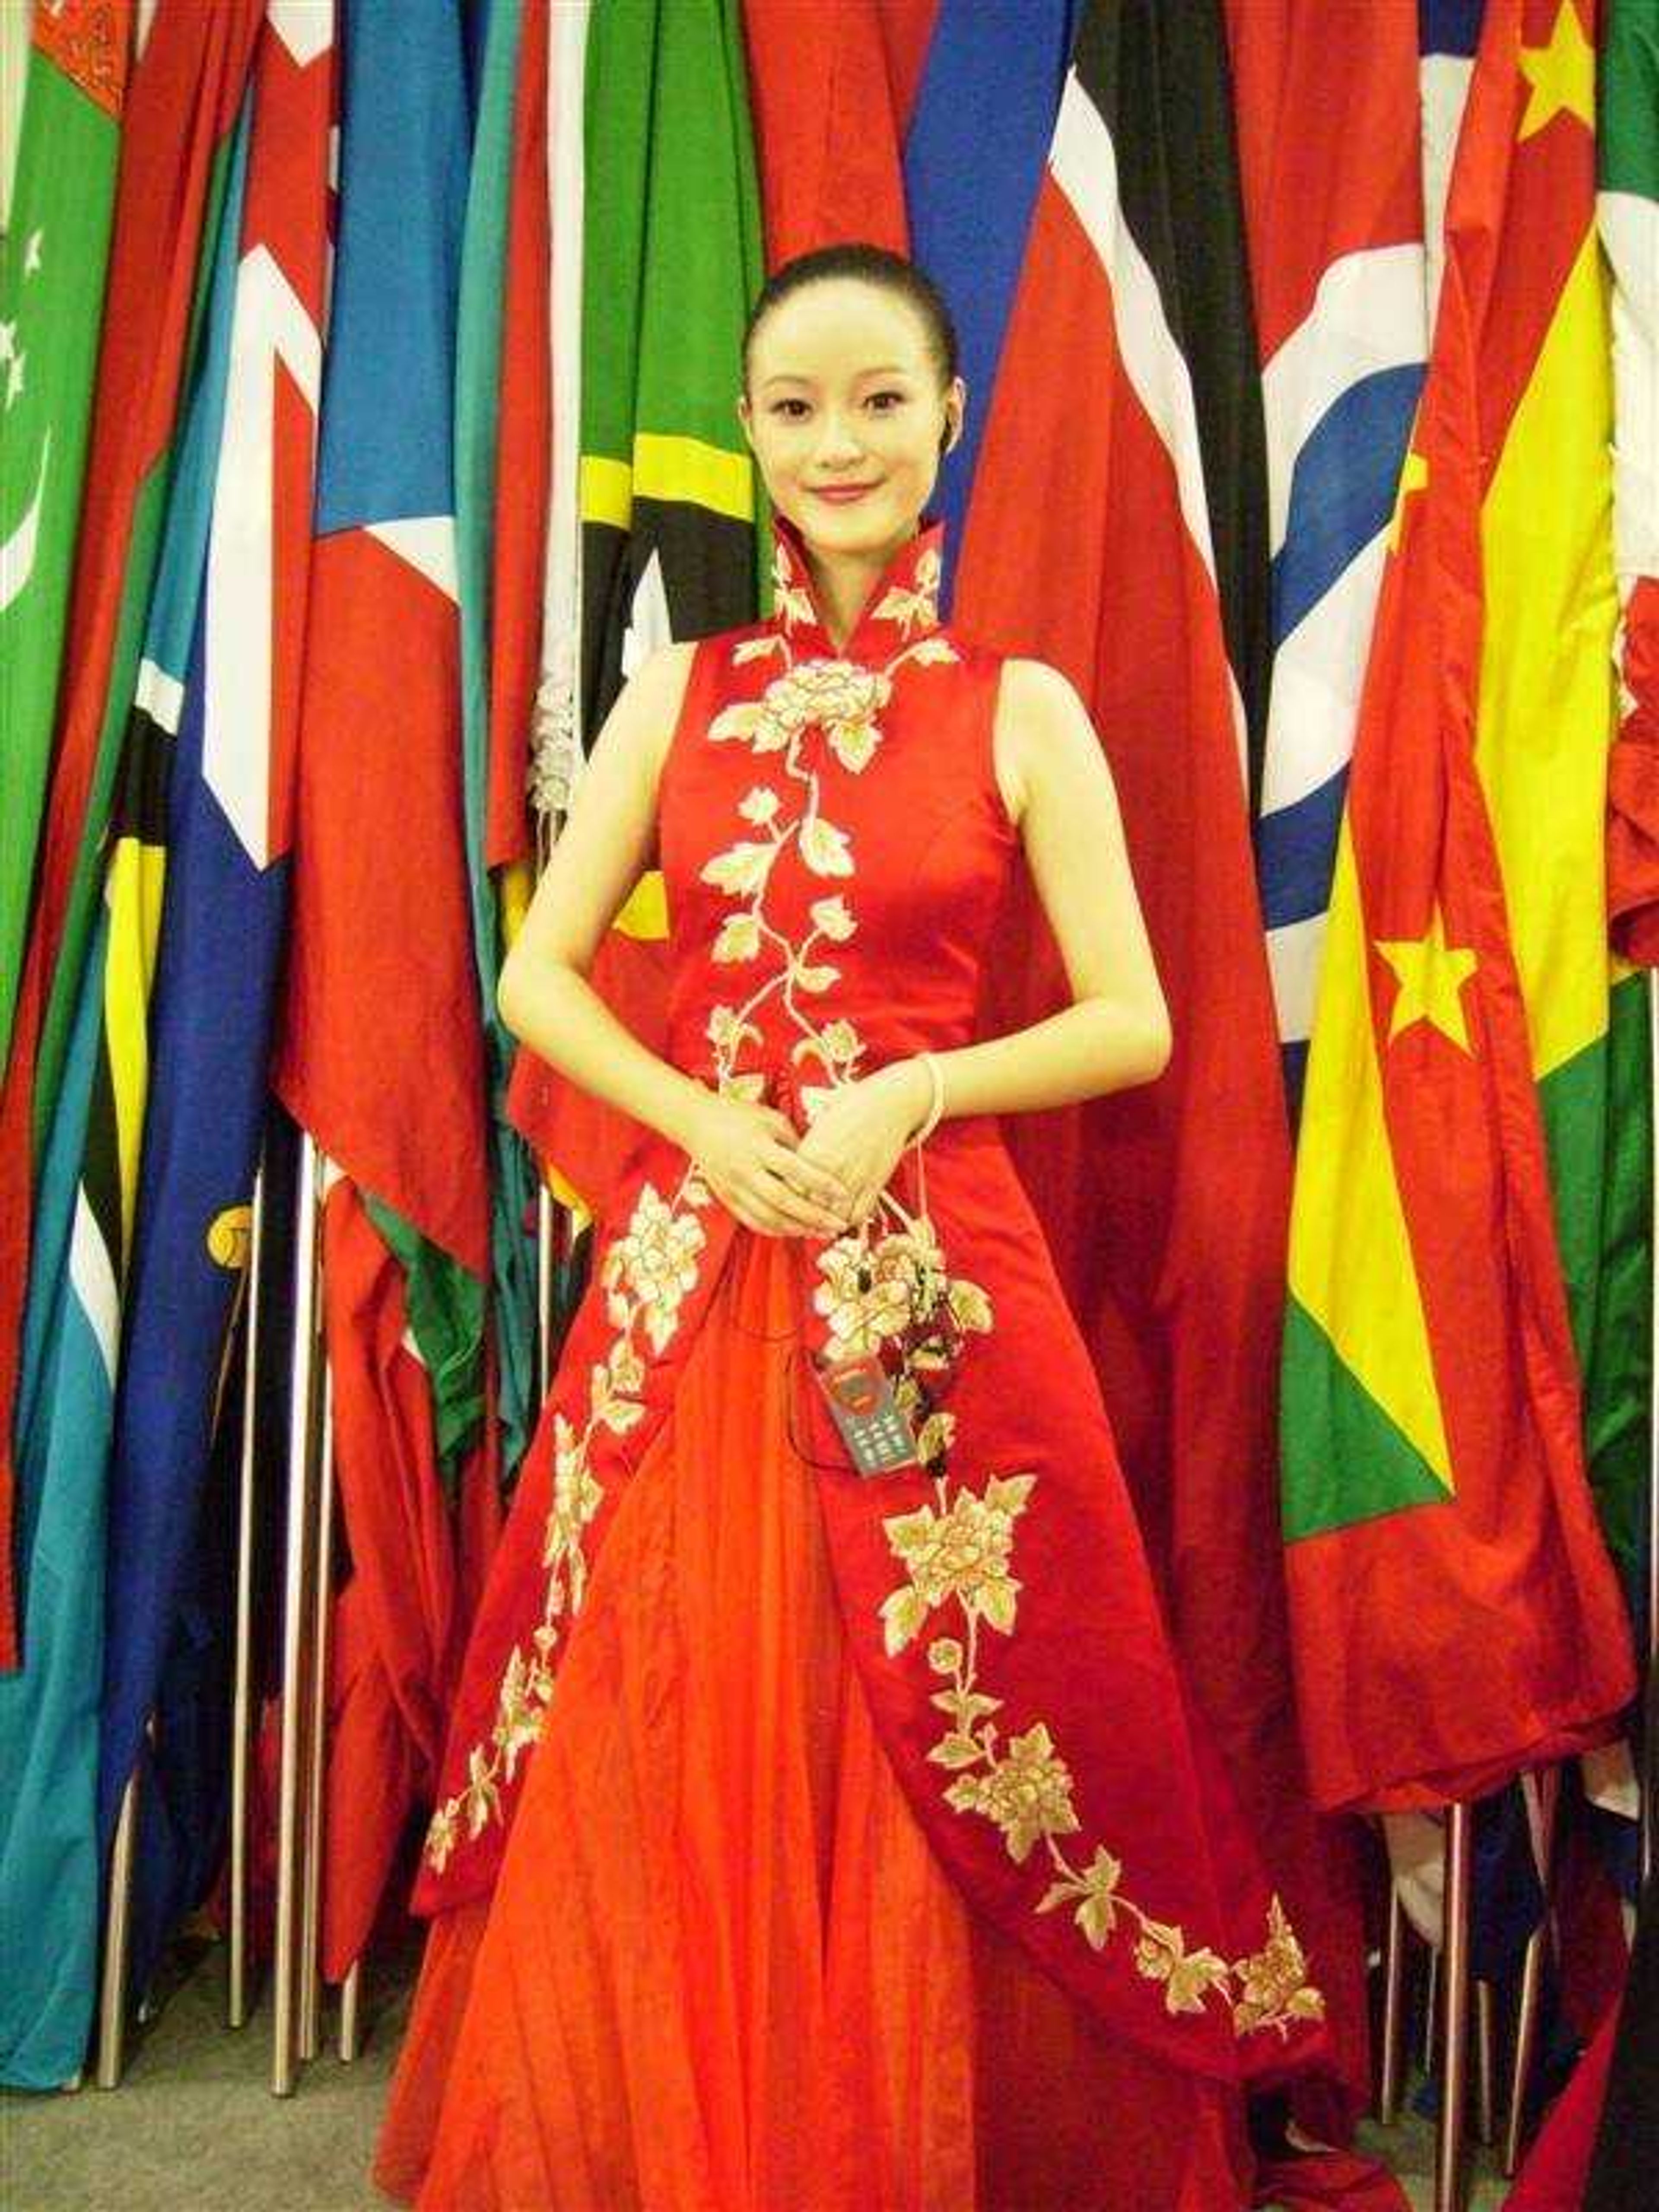 Southeast student represents China in the 2008 Olympic Games